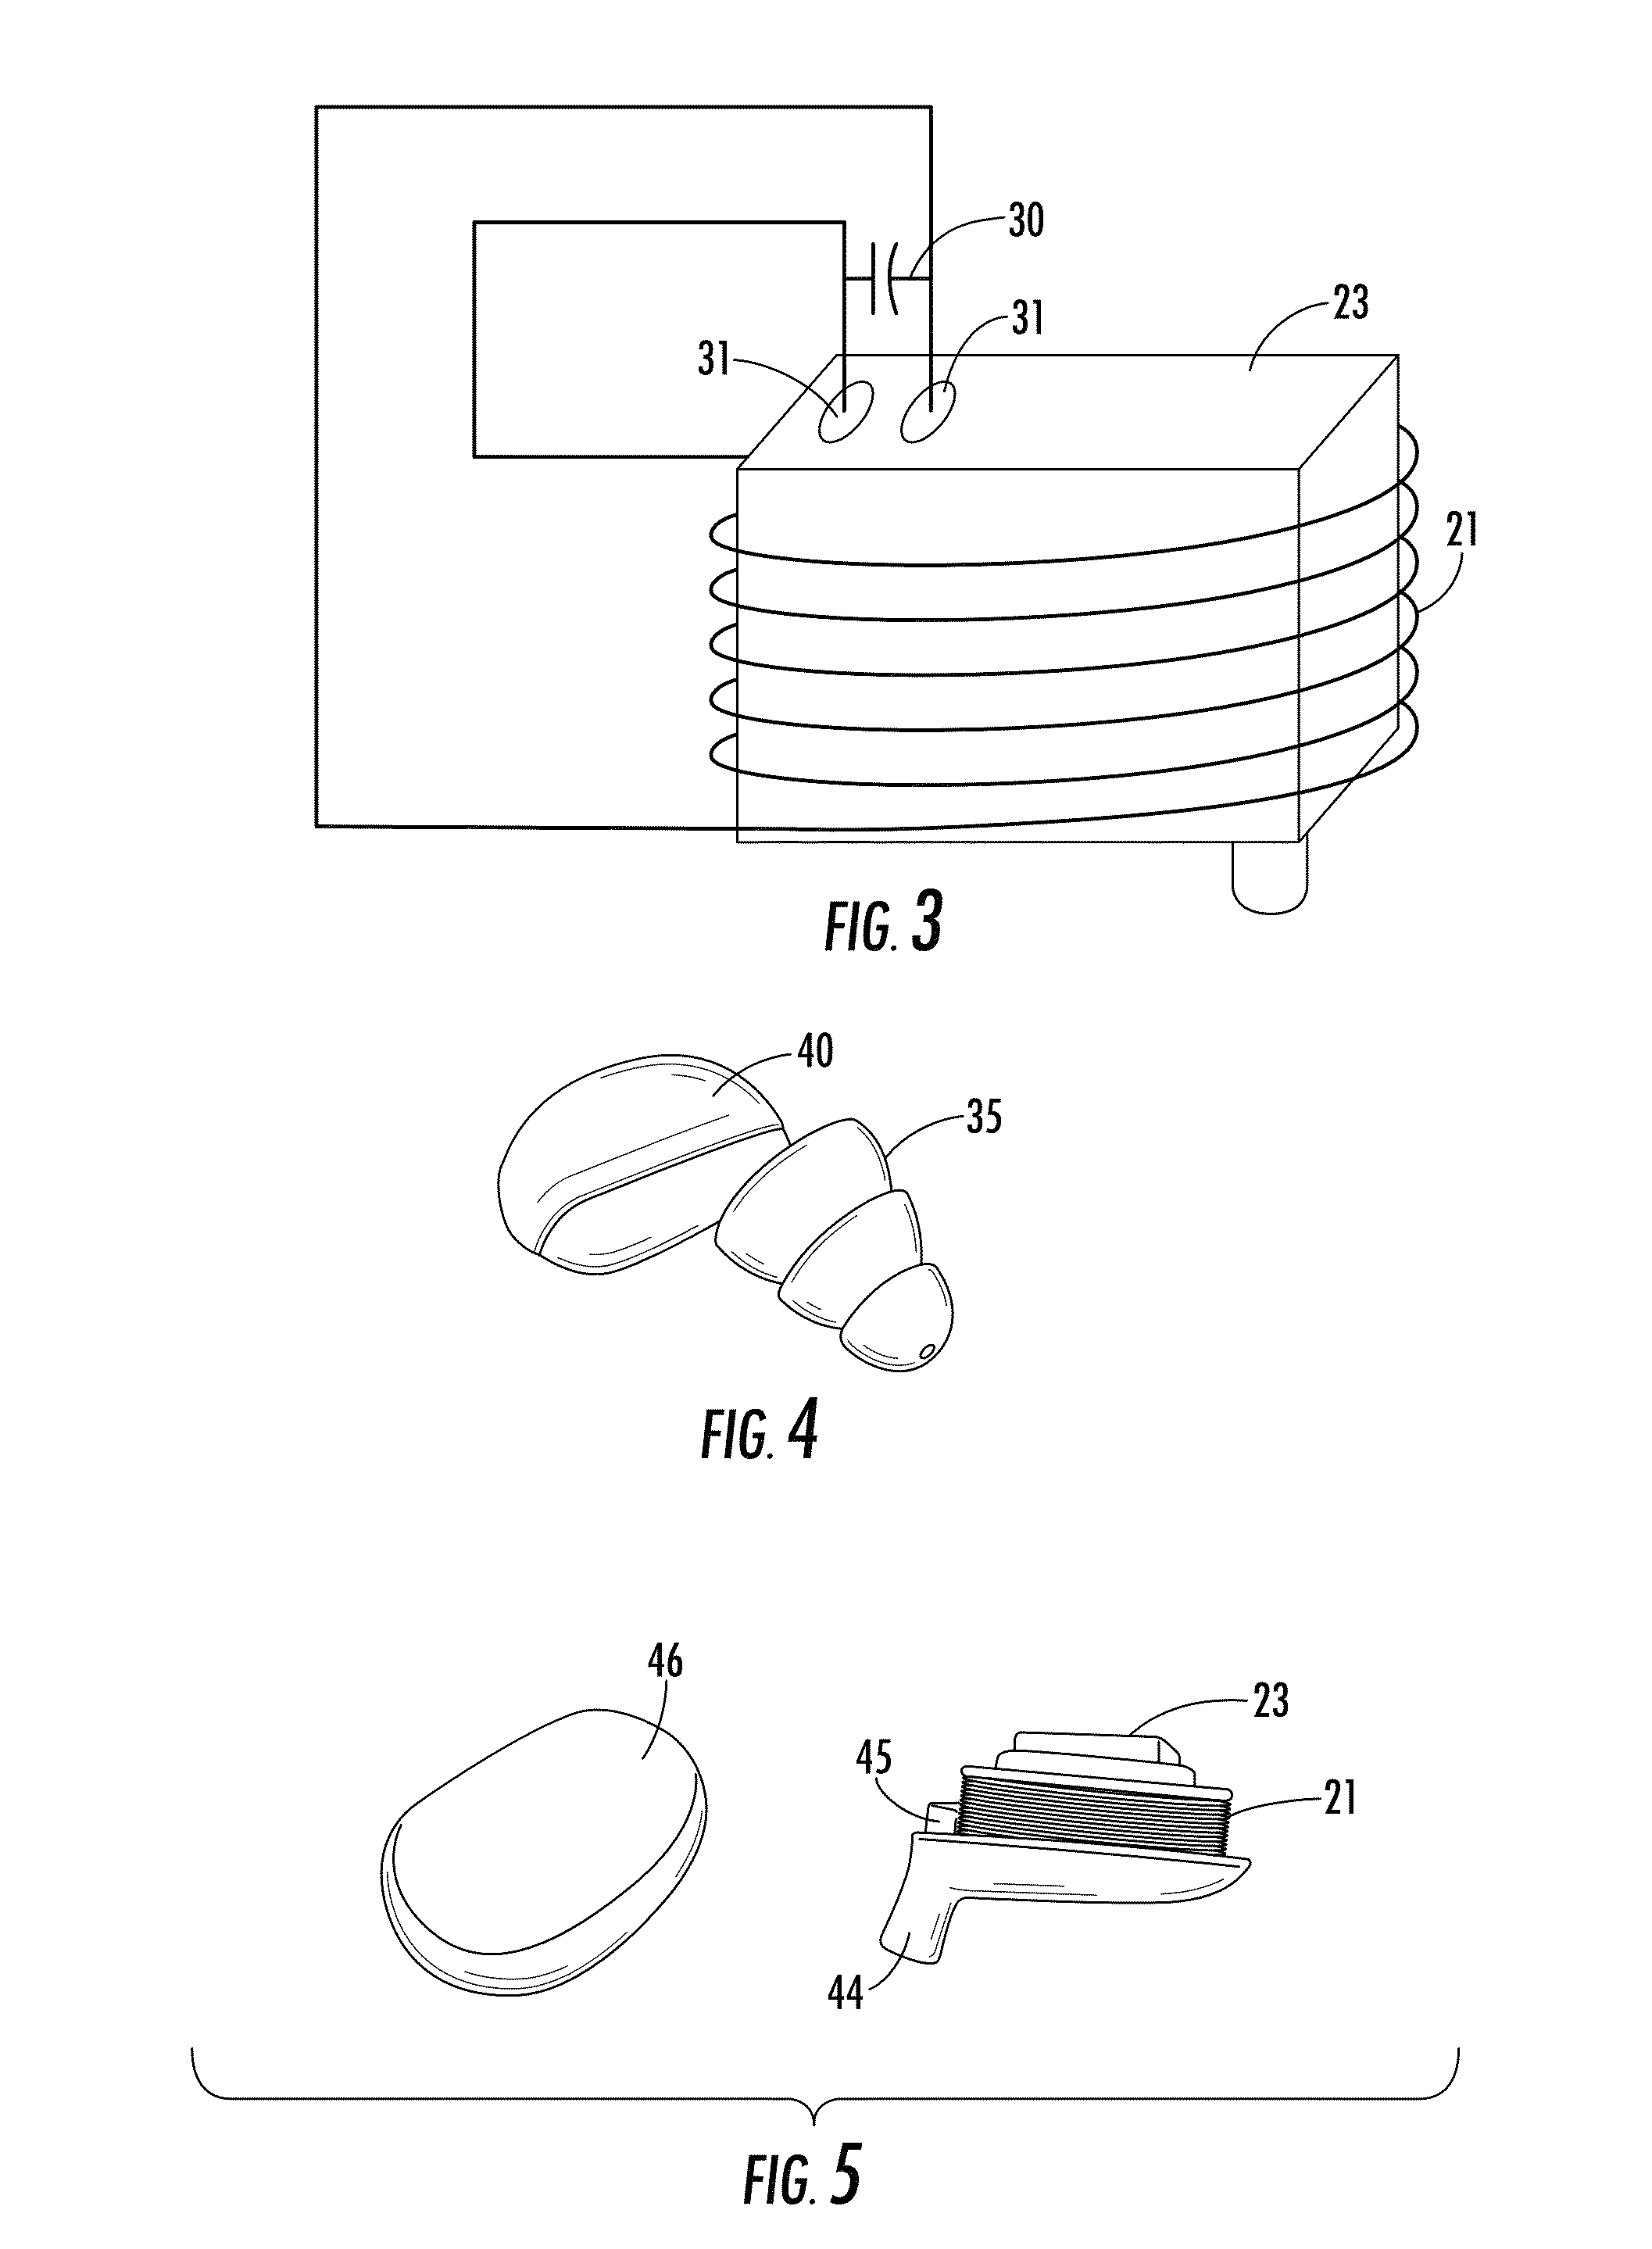 Wireless earplug with improved sensitivity and form factor